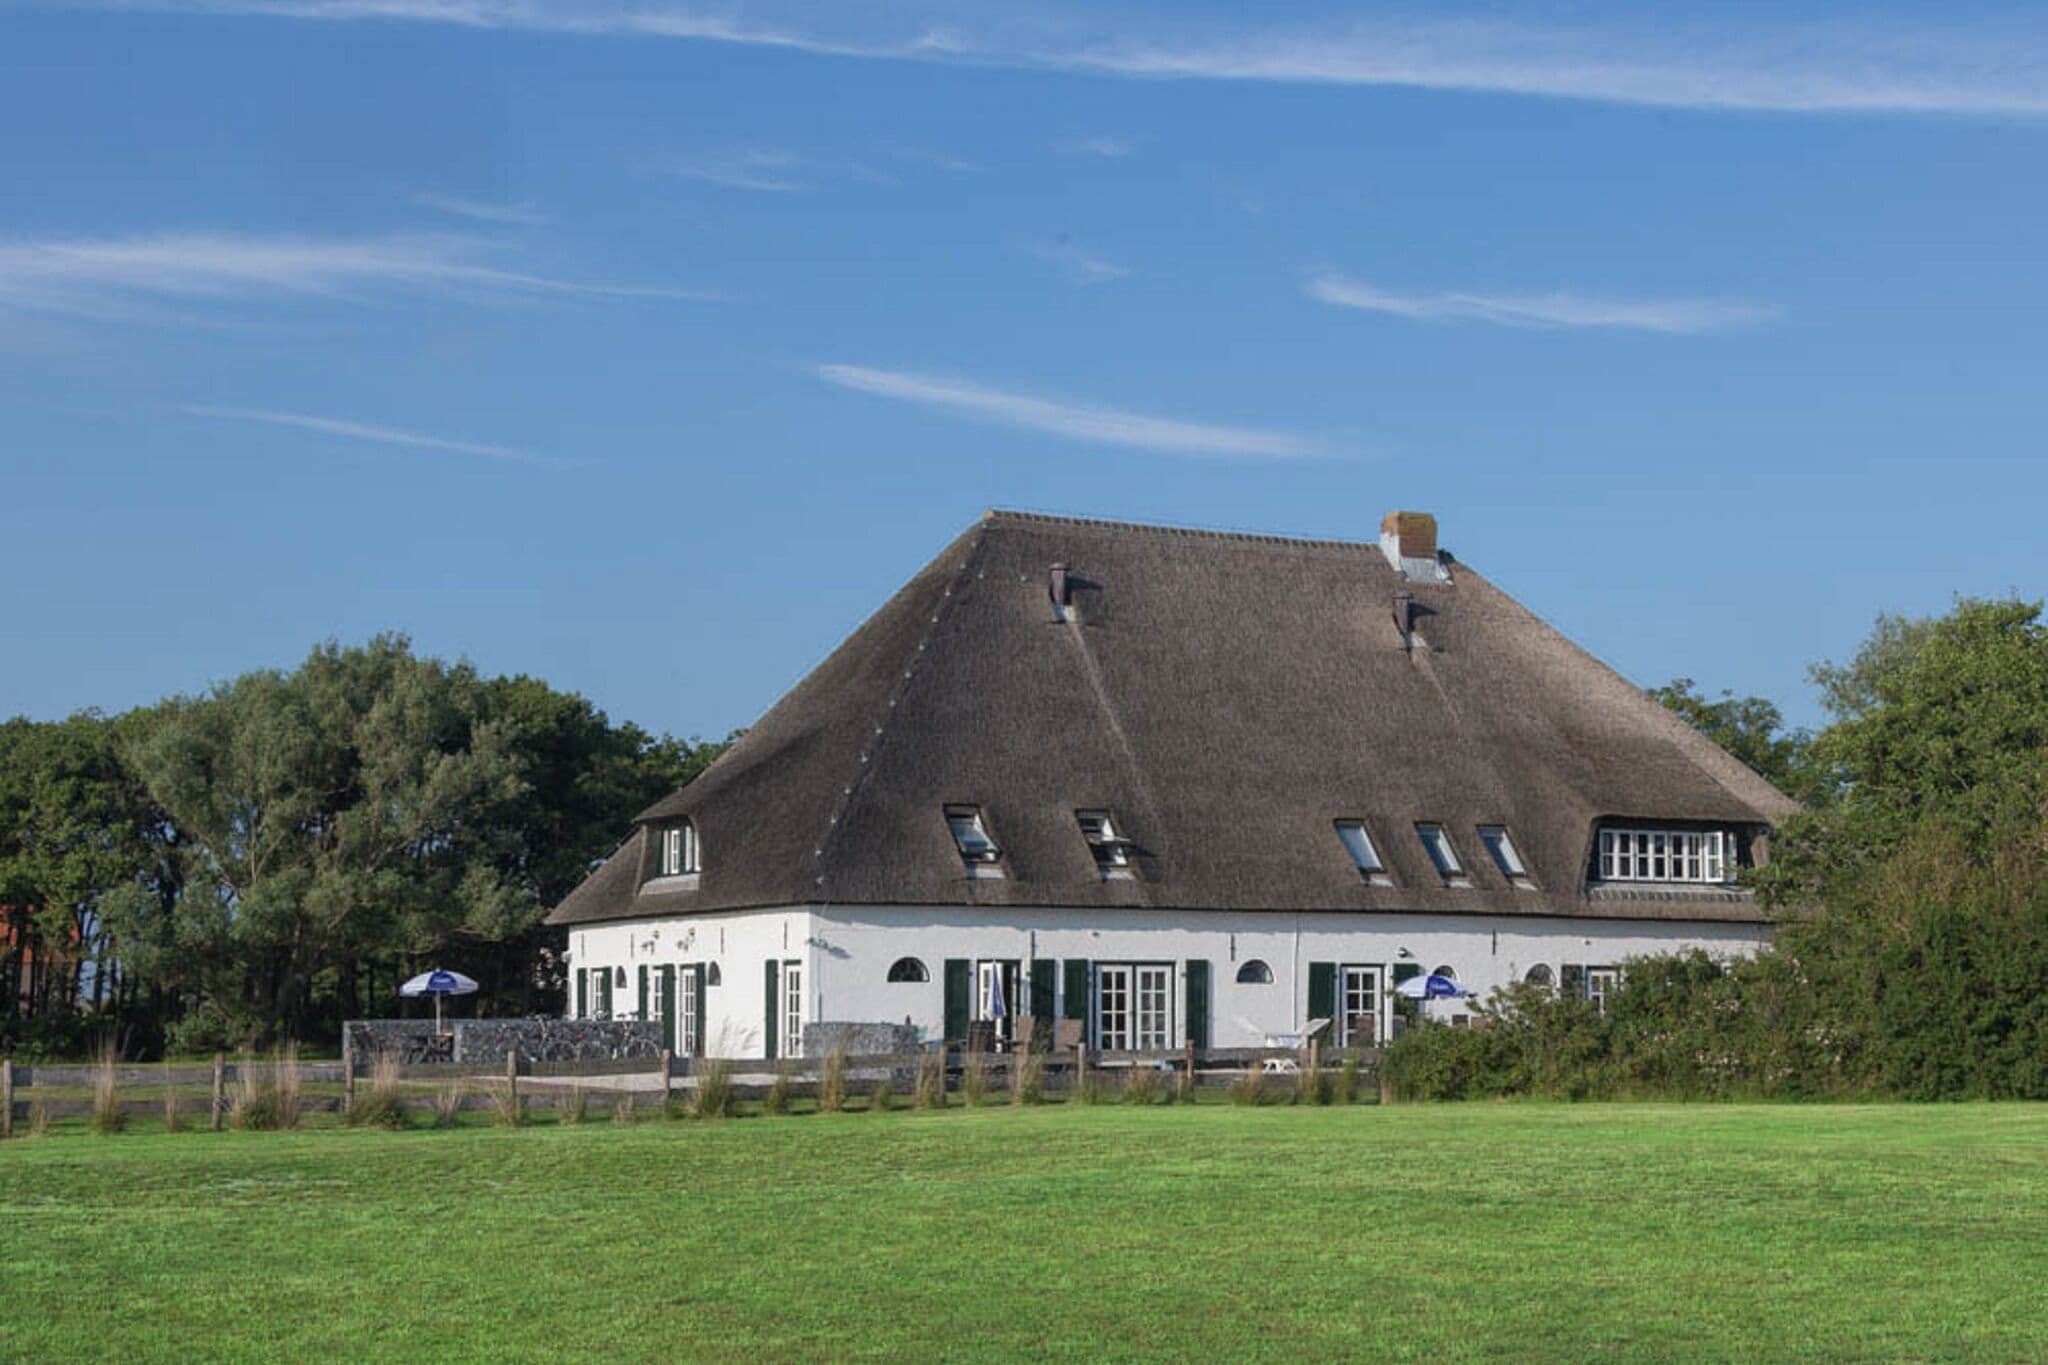 Apartment in farmhouse on the island of Texel